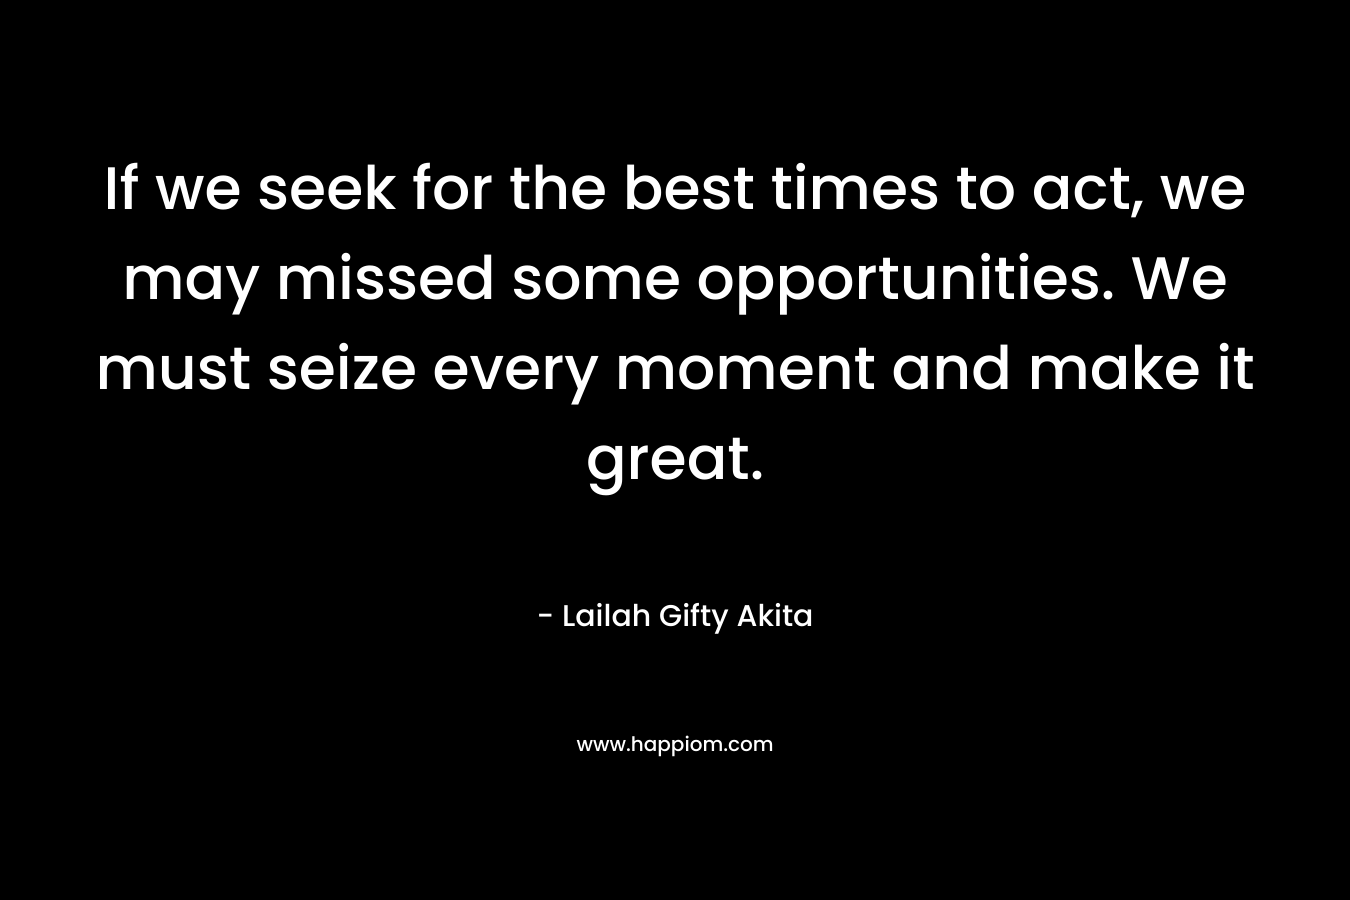 If we seek for the best times to act, we may missed some opportunities. We must seize every moment and make it great.